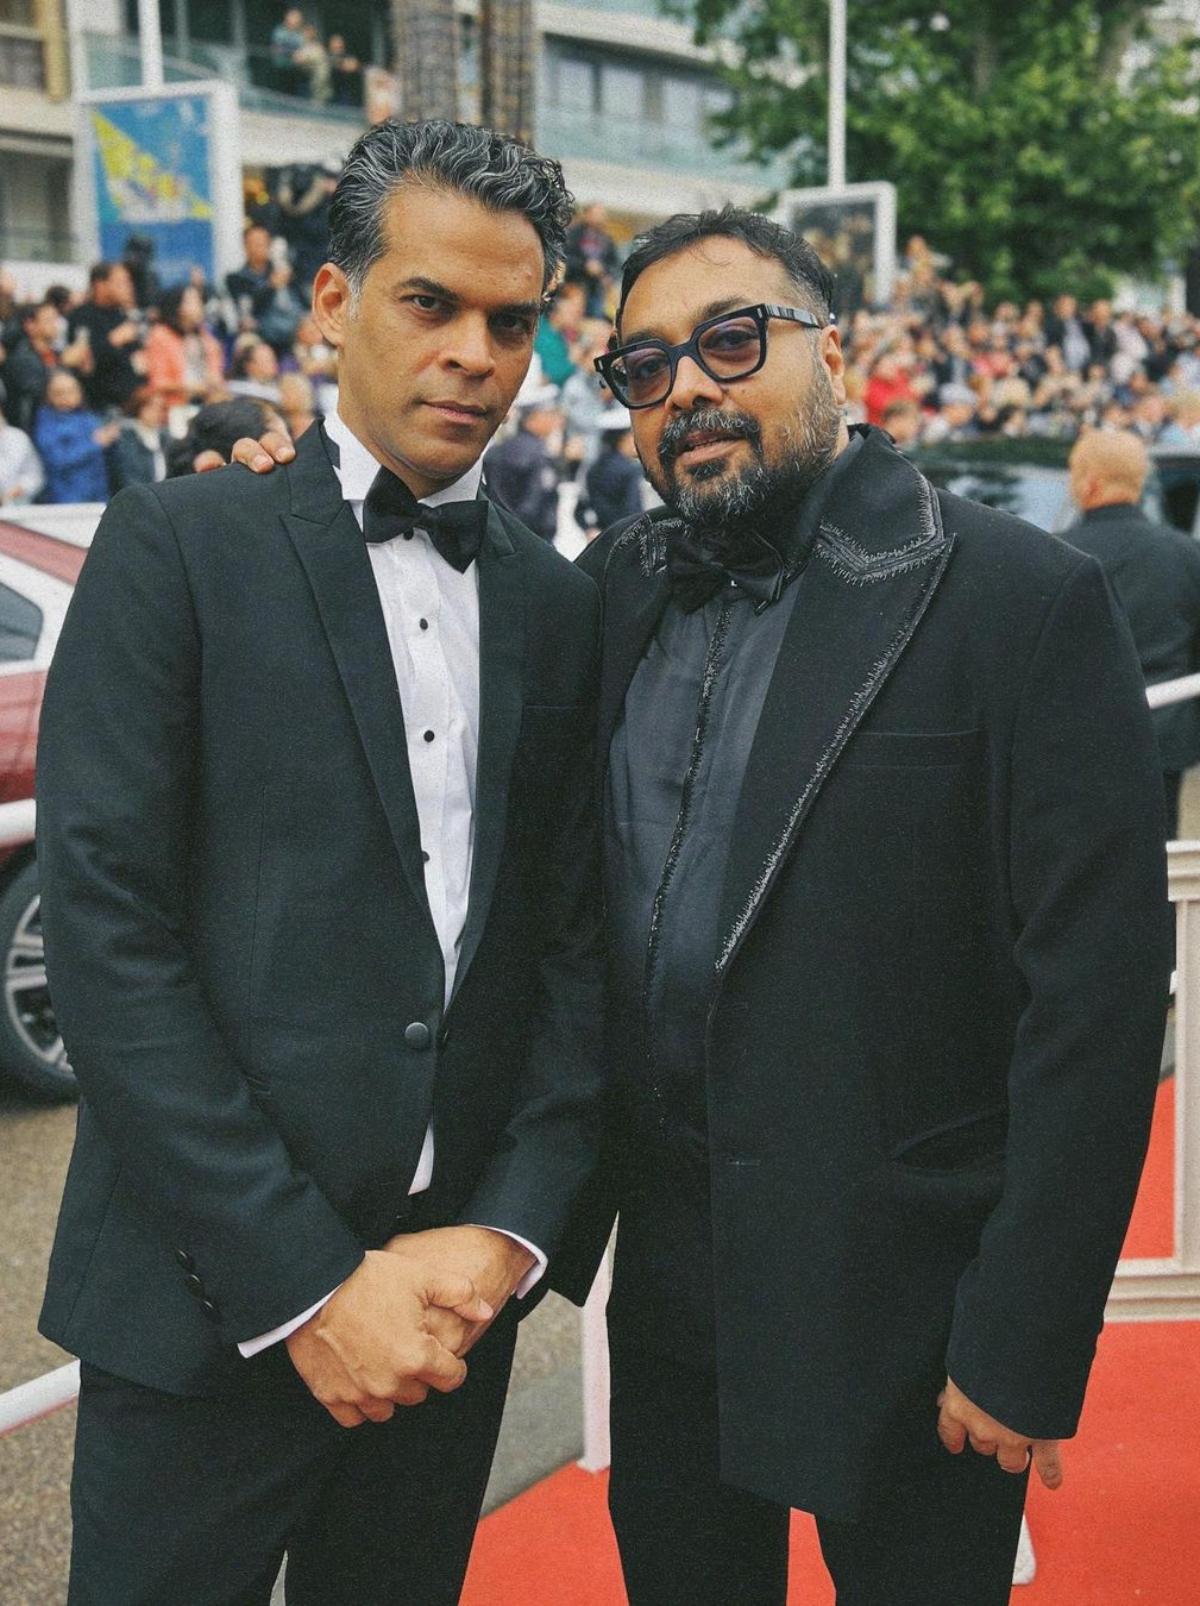 Bollywood director Anurag Kashyap arrived in style at the 76th Cannes Film Festival with his filmmaker friend Vikramaditya Motwane. Twinning in tuxedos, Anurag and Vikramaditya were all smiles as they posed for photos together on the red carpet. While Kashyap is attending the prestigious event for the premiere of his upcoming project 'Kennedy', his good friend Motwane has joined to show his support at the premiere. 